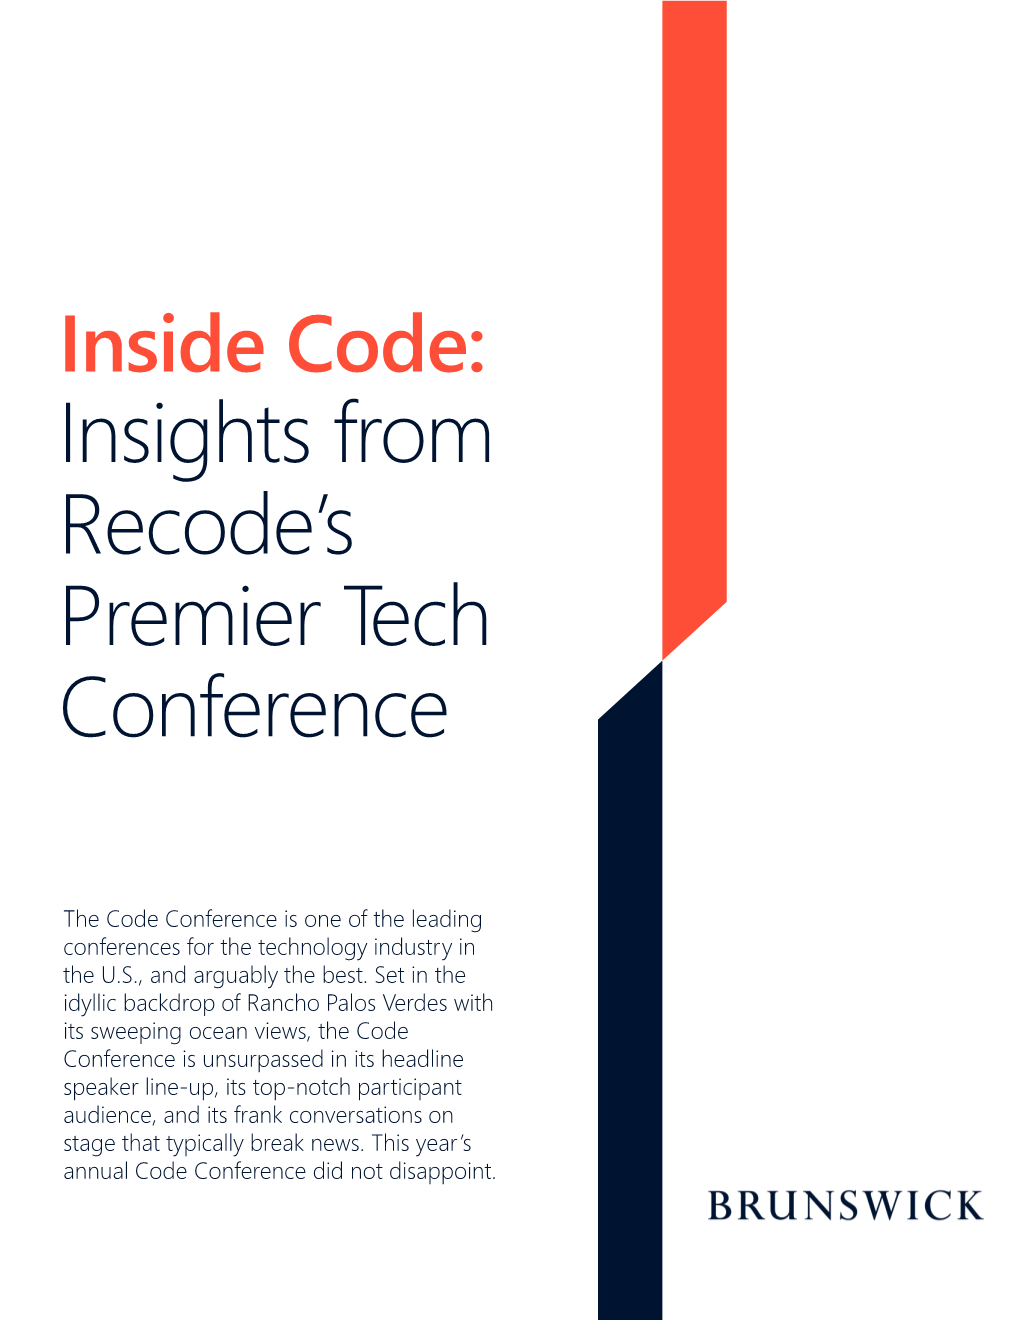 Insights from Recode's Premier Tech Conference